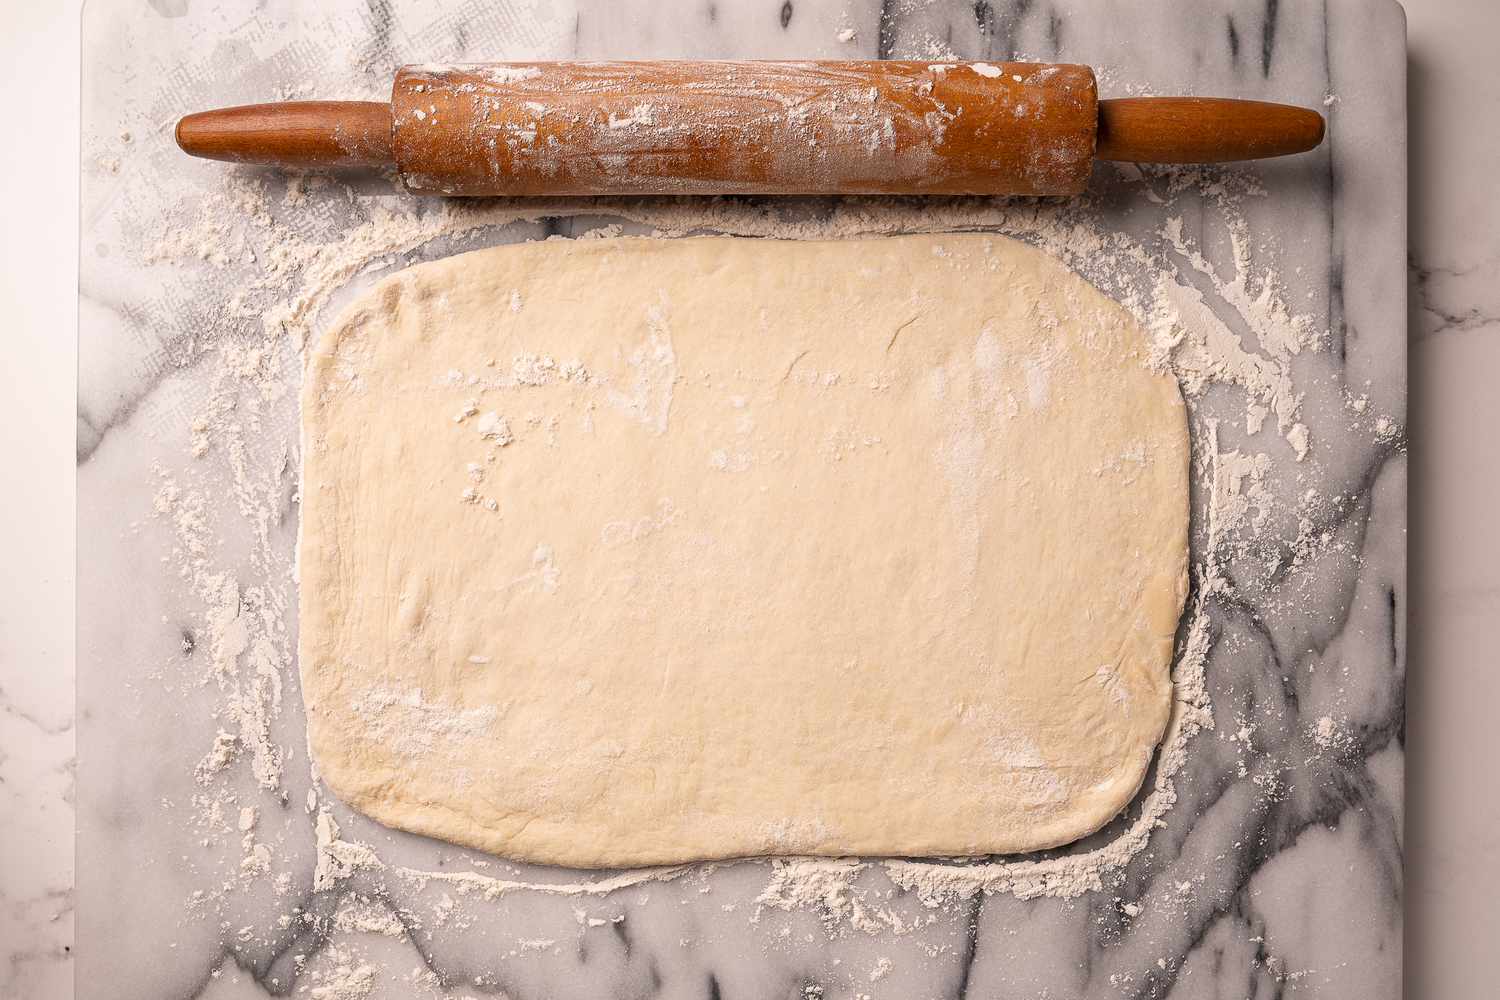 Bread dough rolled out into a rectangle on a floured surface